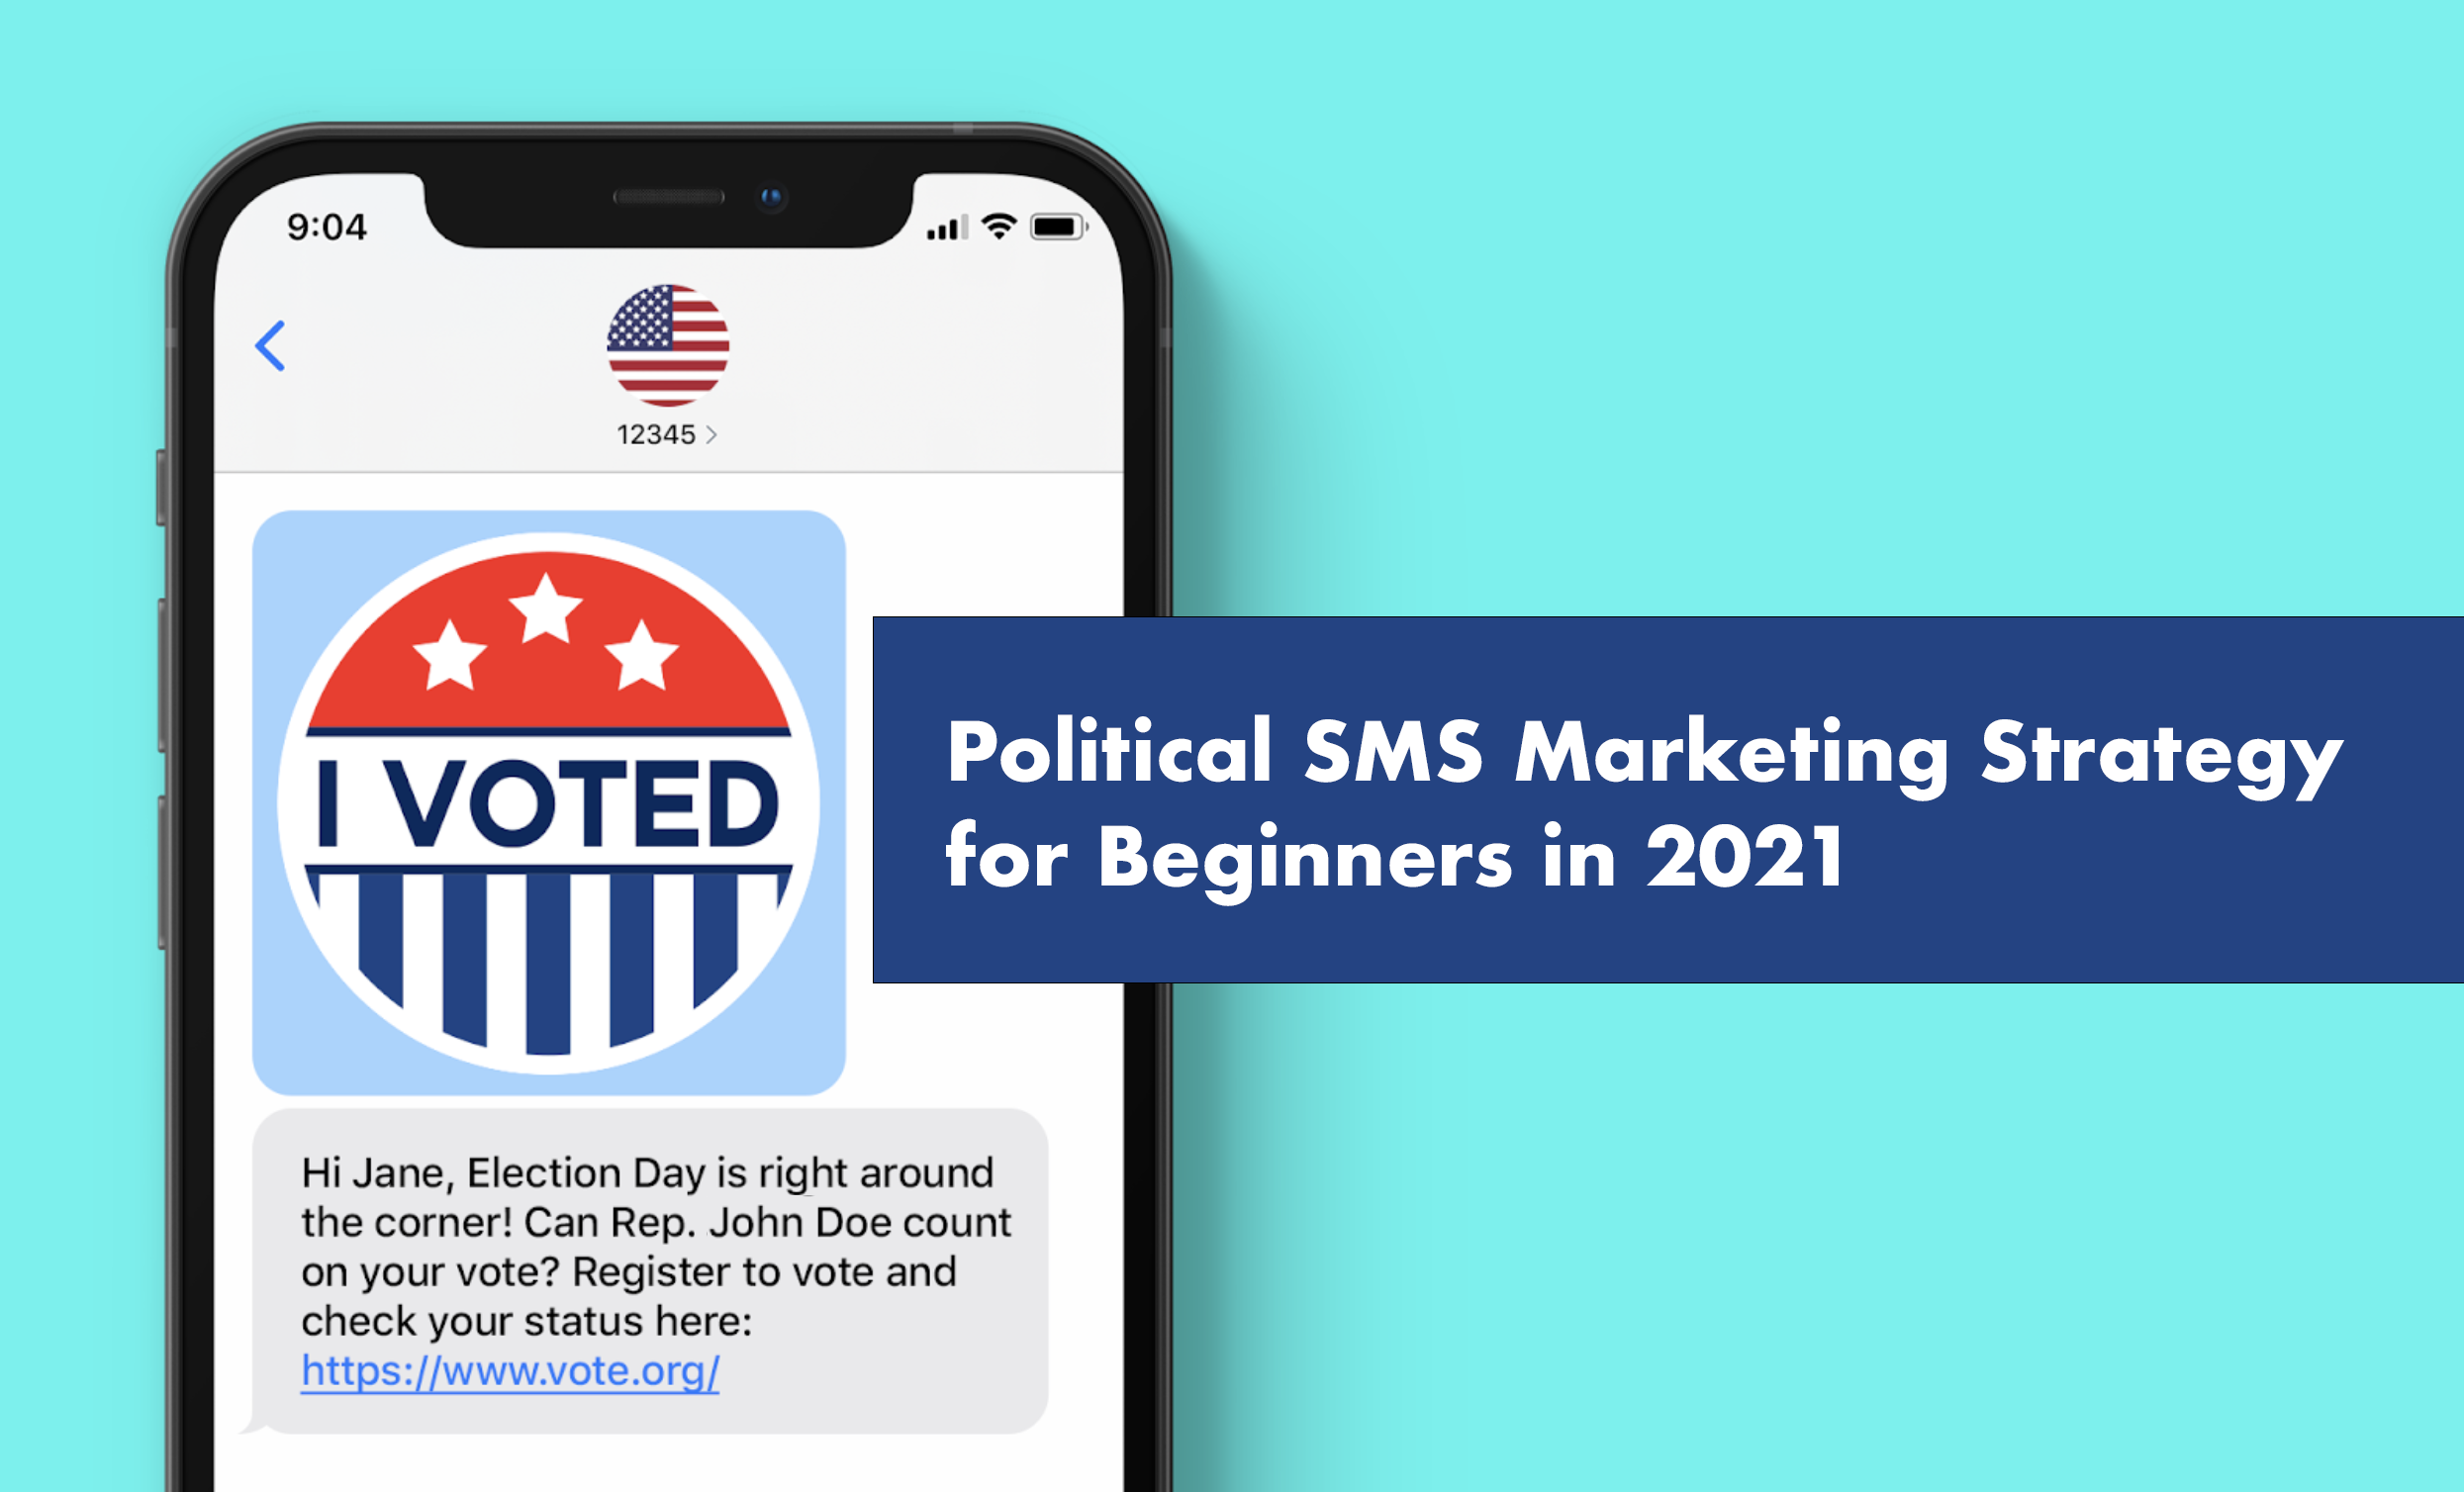 Political SMS Marketing Strategy for Beginners in 2021